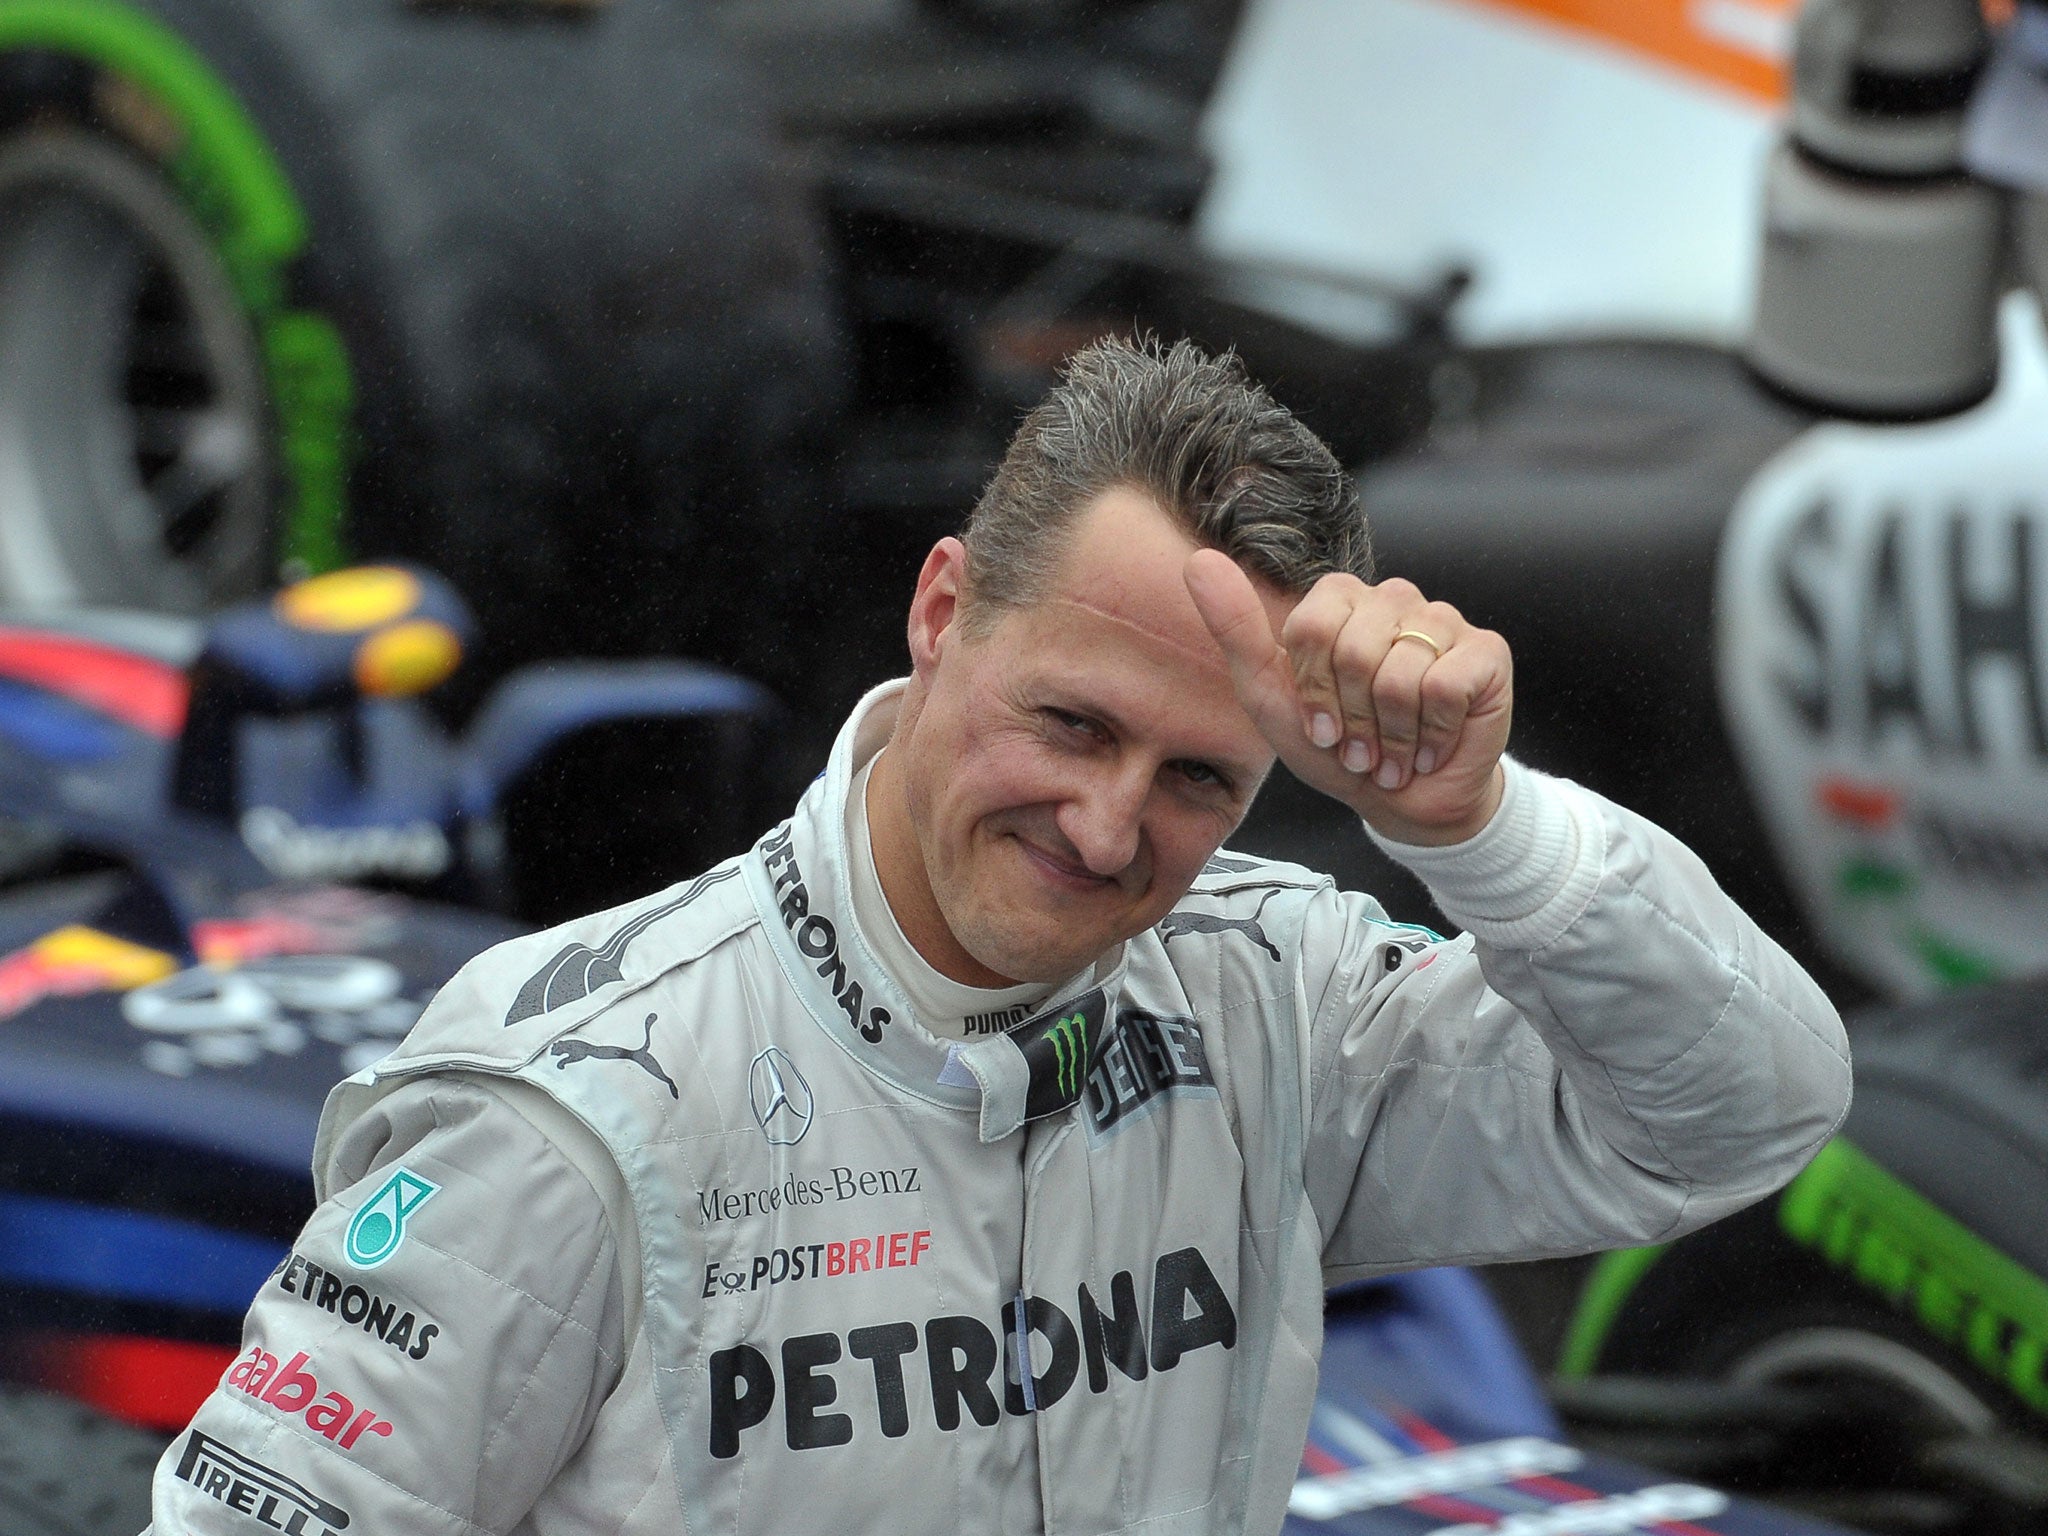 Michael Schumacher has been in a medically induced coma for two months